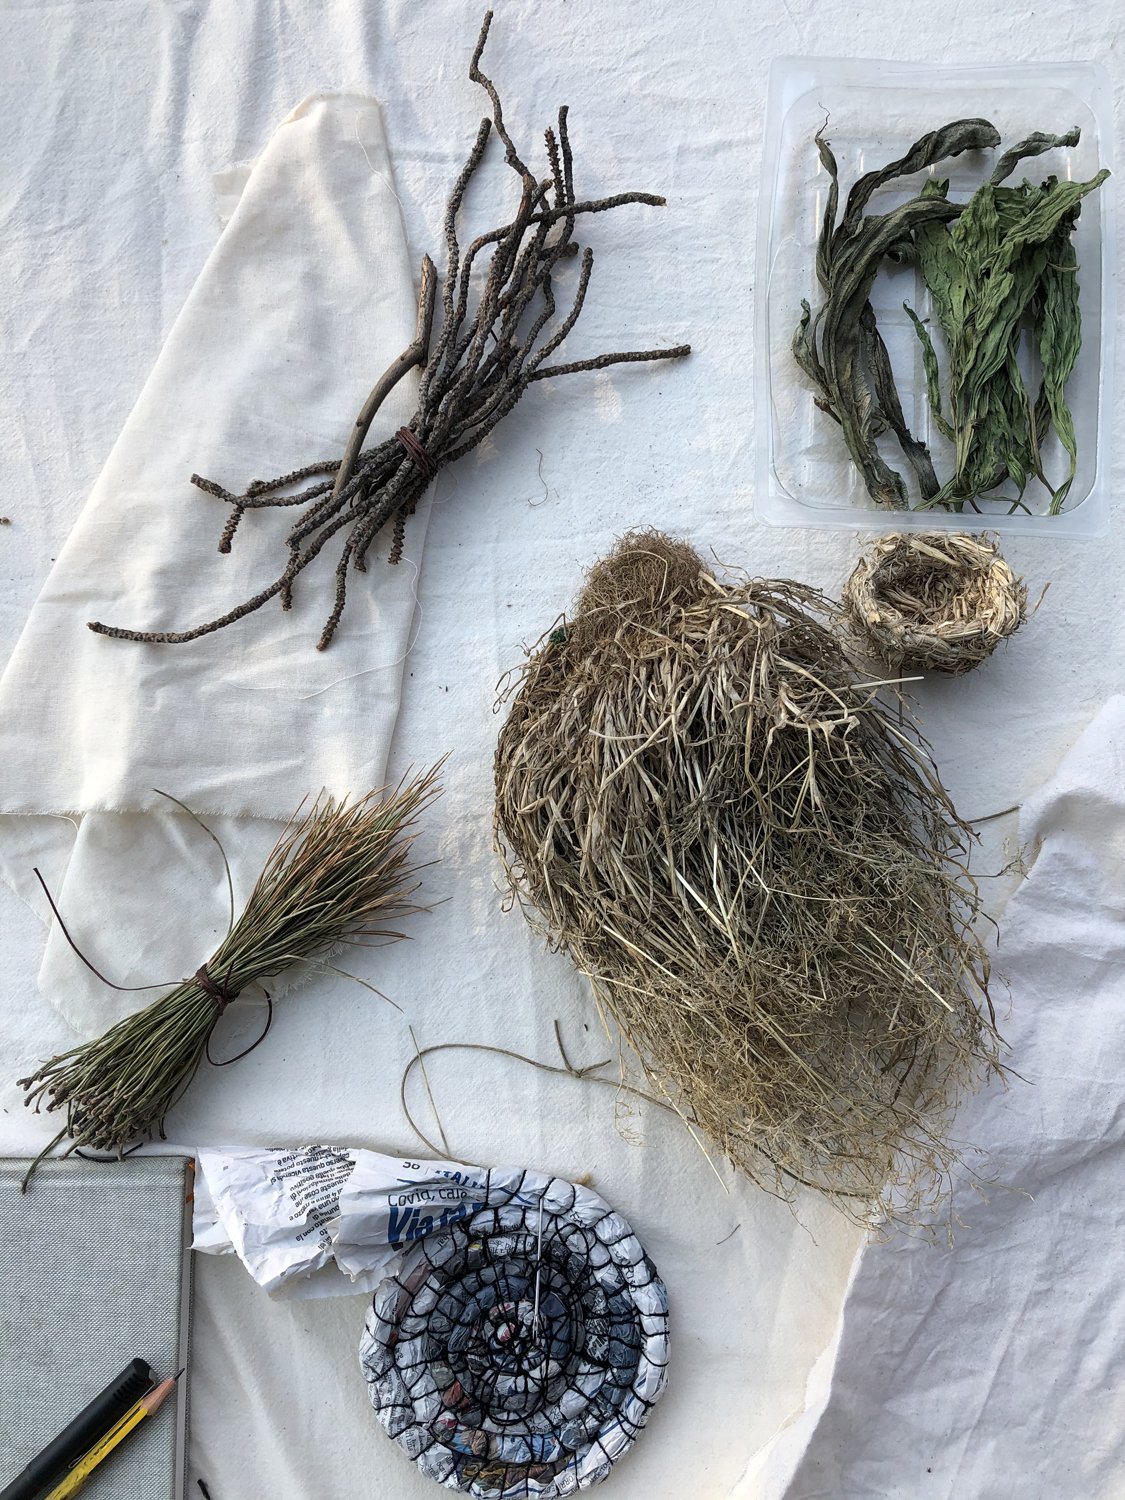  Material examples, clockwise from the bottom: newspaper coiled with thread, pine needles, pine branches, leaves, grass &amp; root basket, and grass and roots sample.  Photo: Bianca Bonaldi 